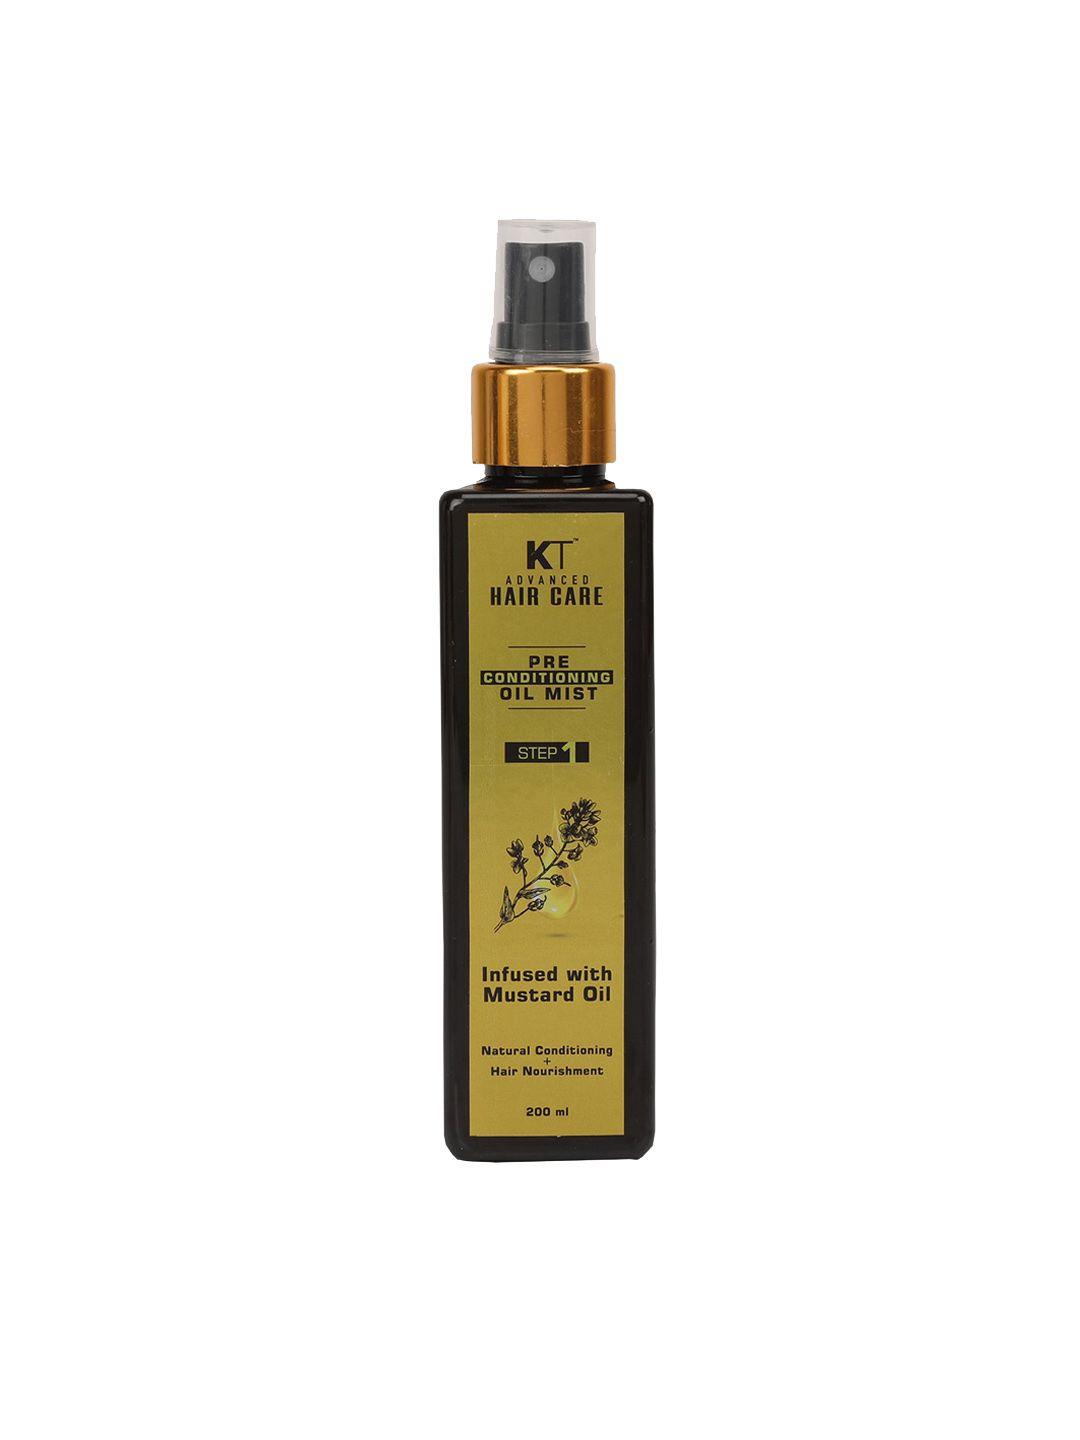 kehairtherapy advance hair care pre conditioning oil mist spray with mustard oil - 200 ml